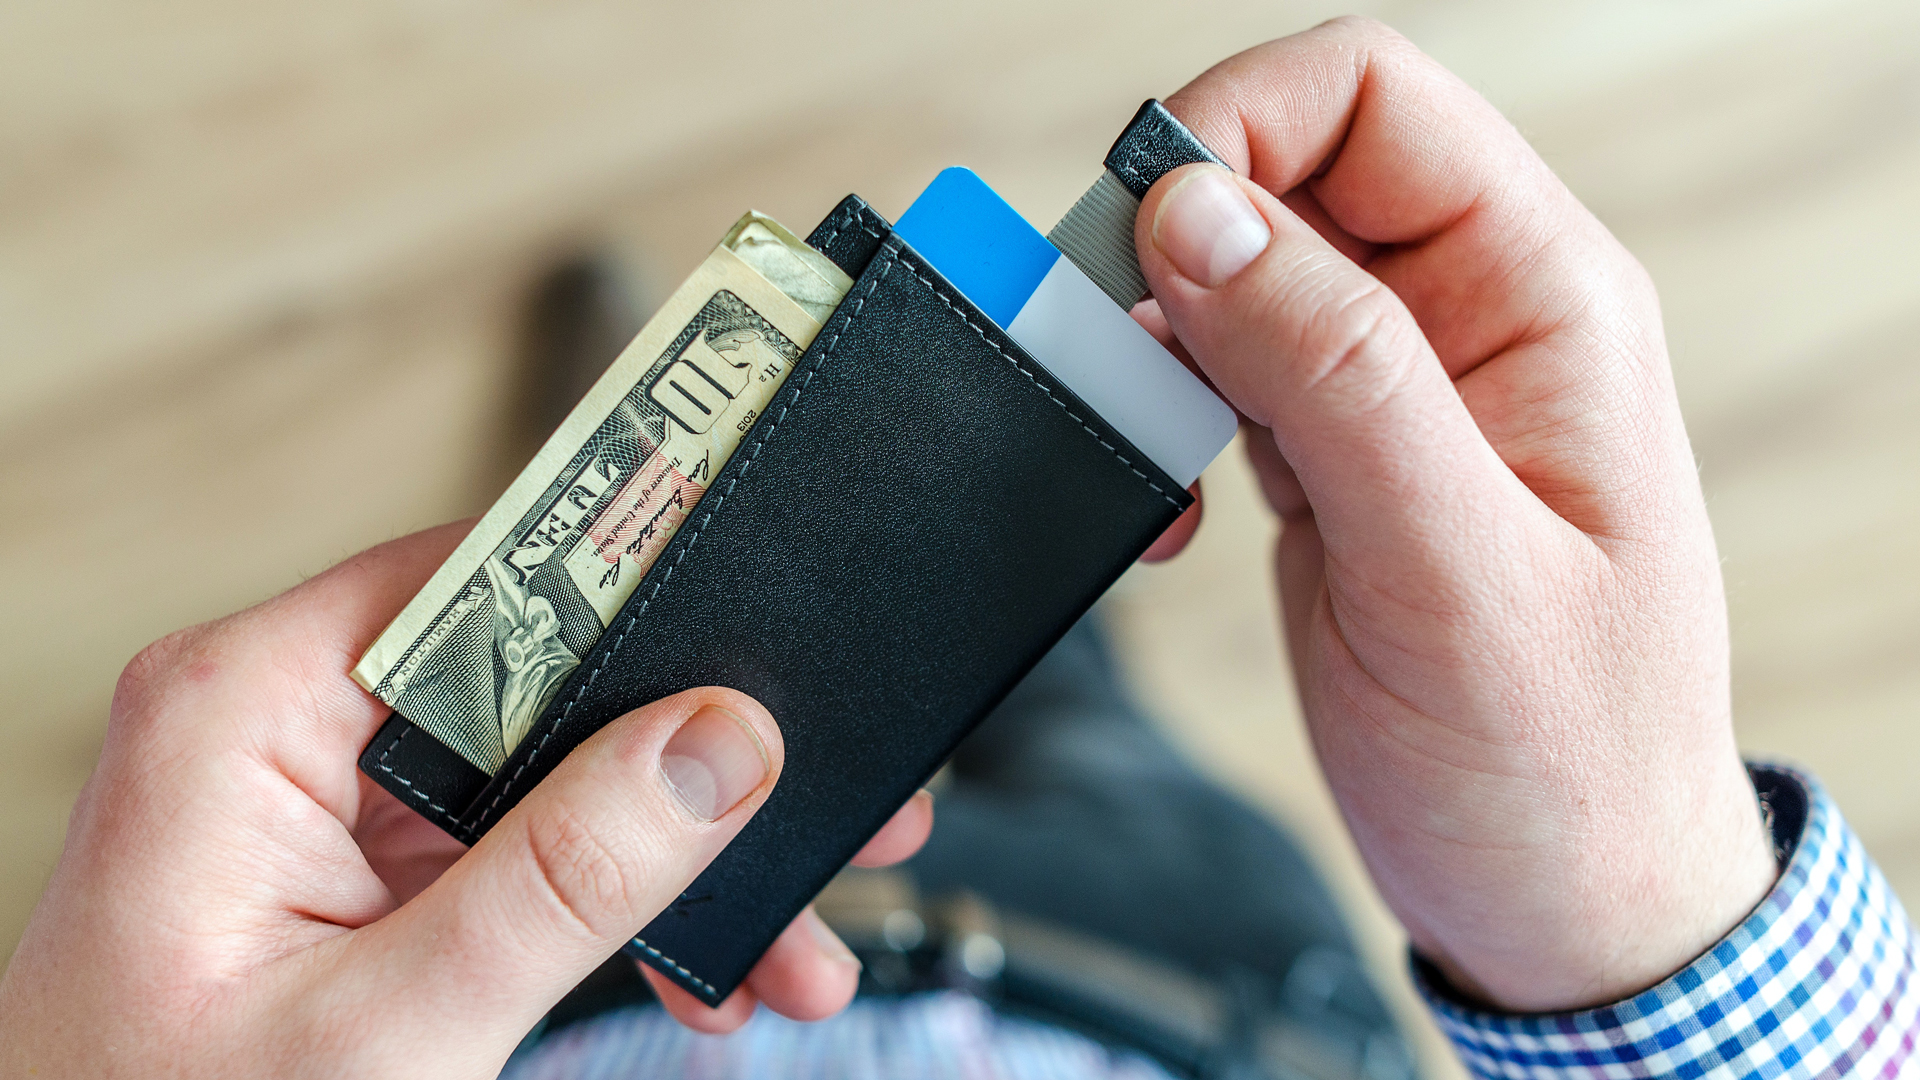 A person pulls out a wallet with a ten dollar bill and credit cards hanging out.